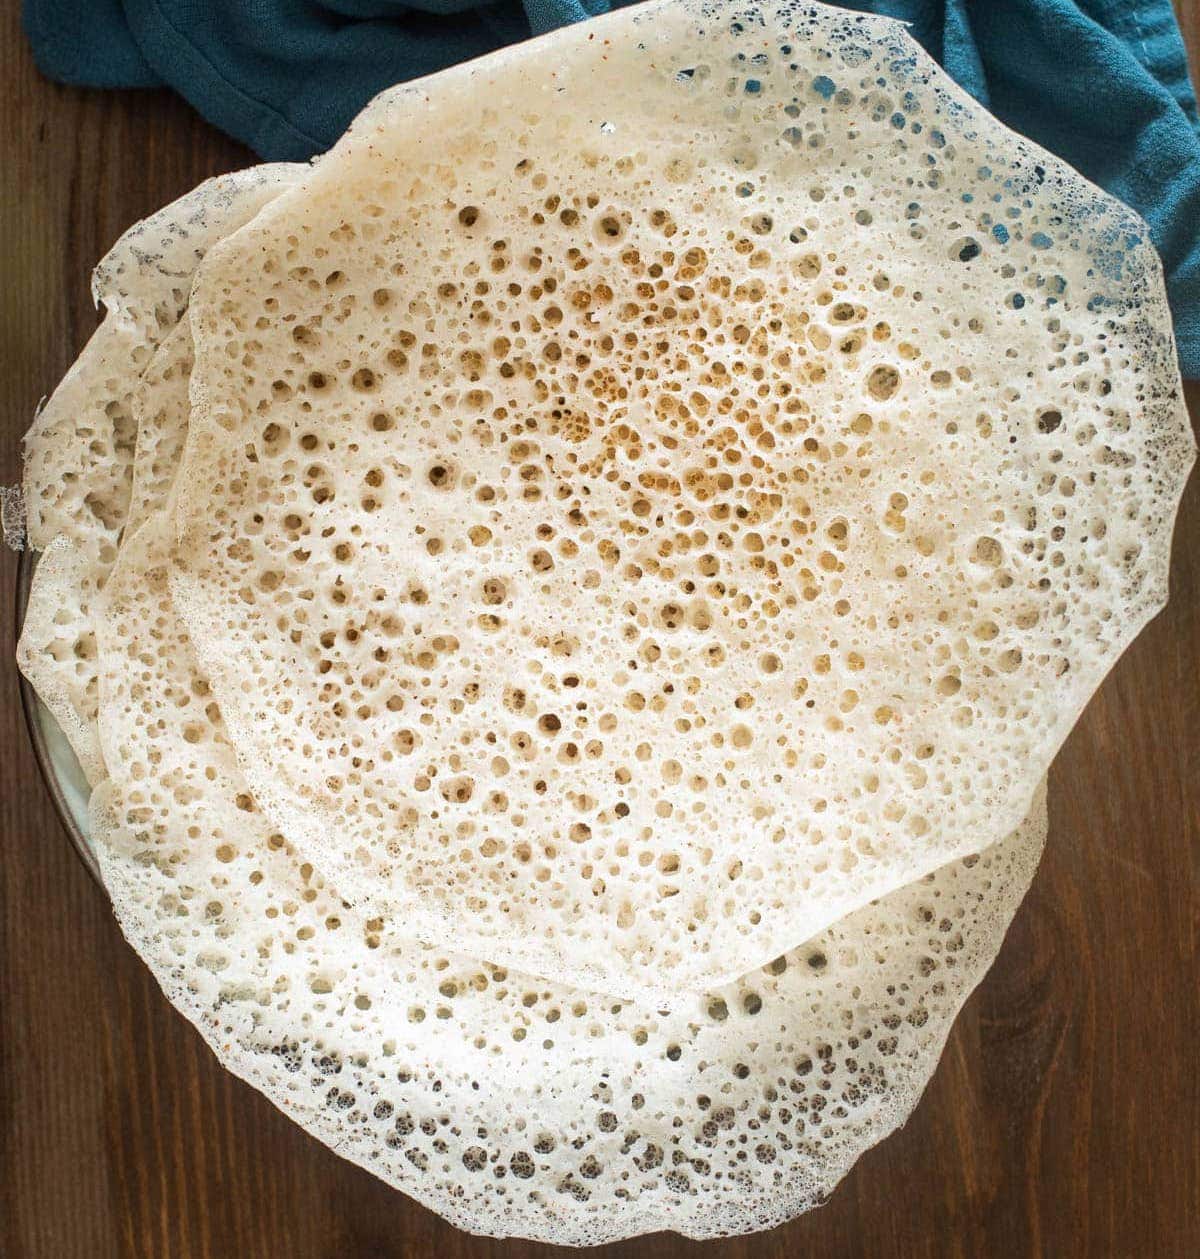 Appam south indian bread on a plate